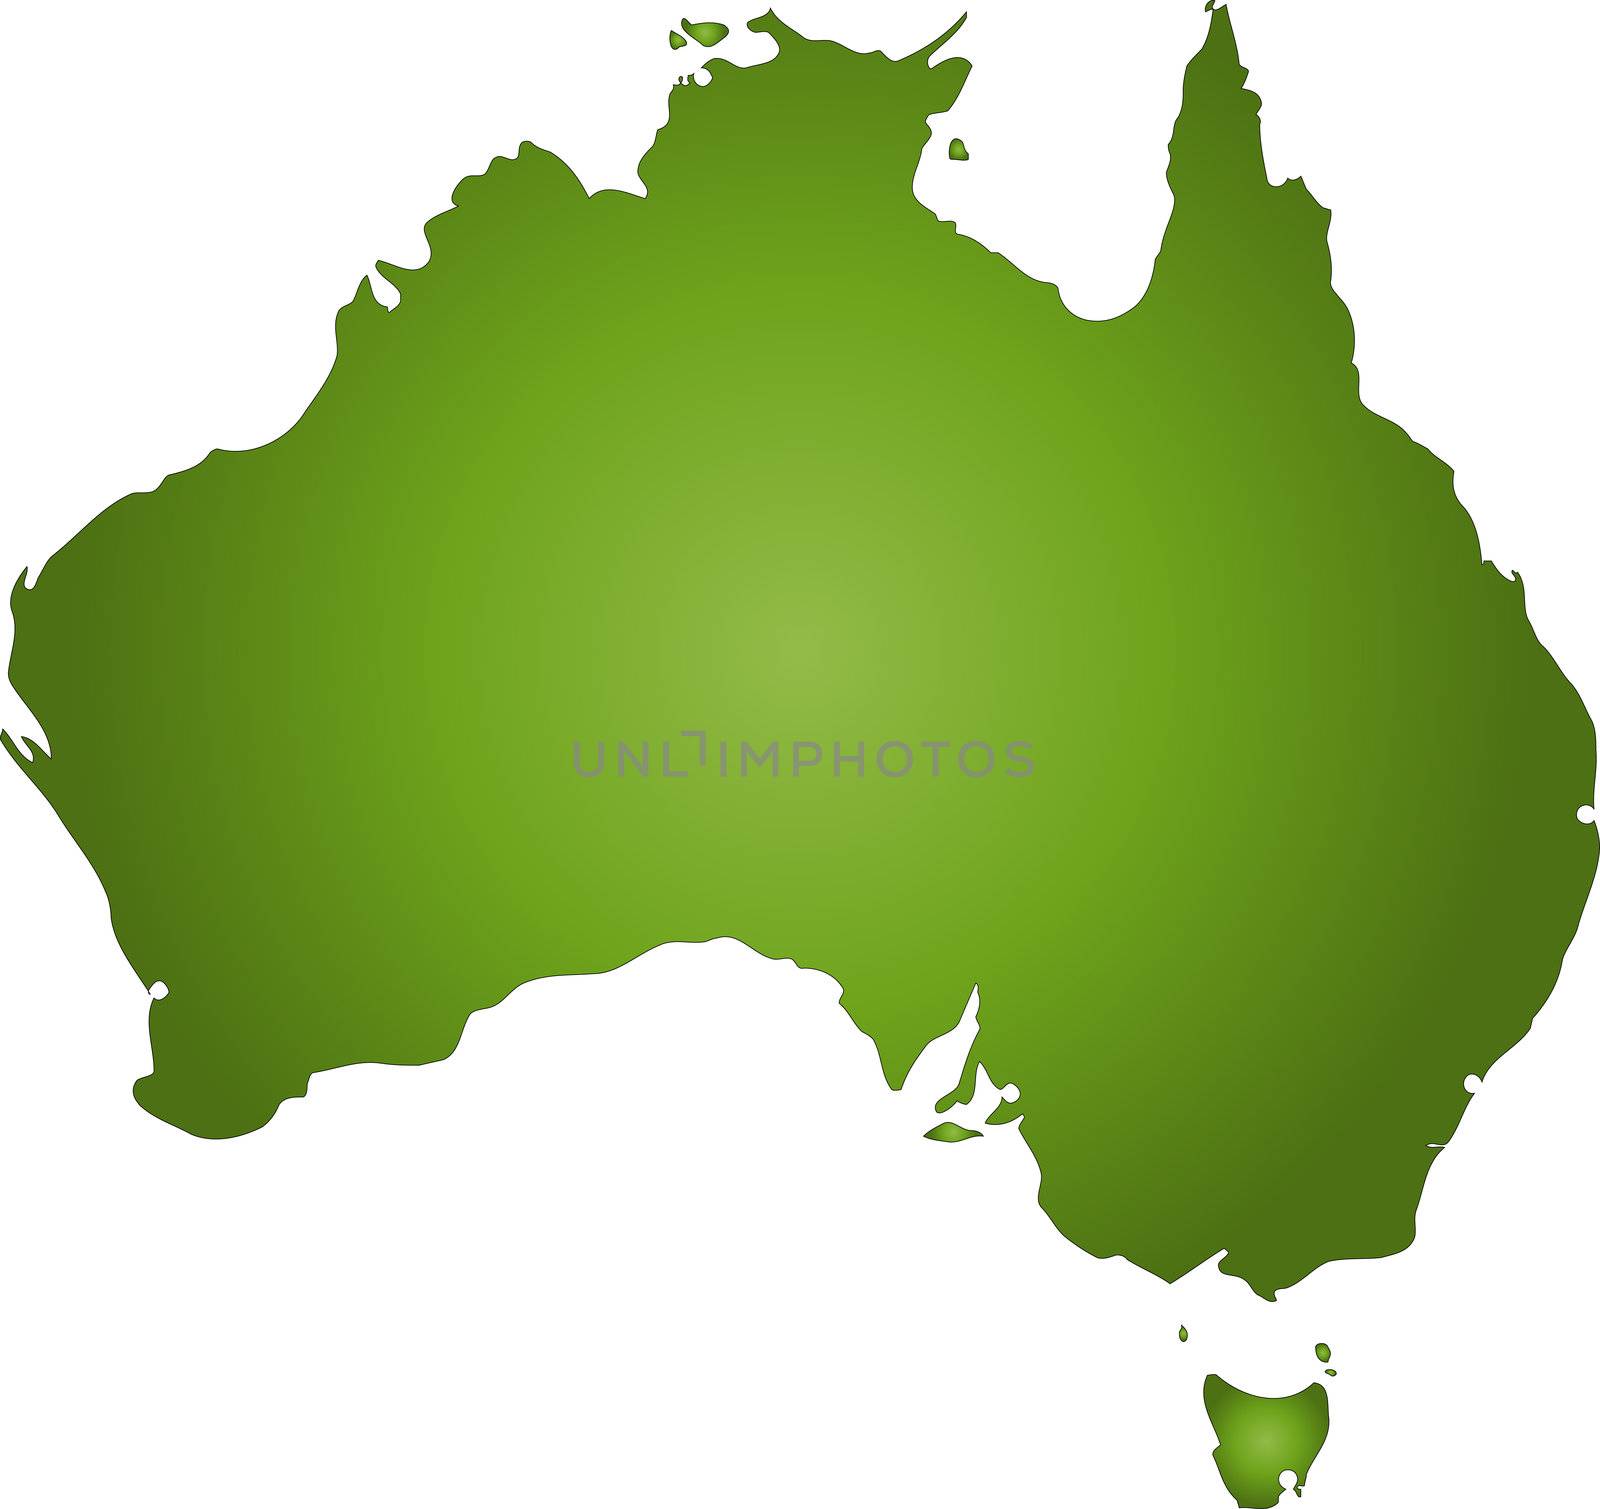 A stylized map of Australia in green tone. All isolated on white background.